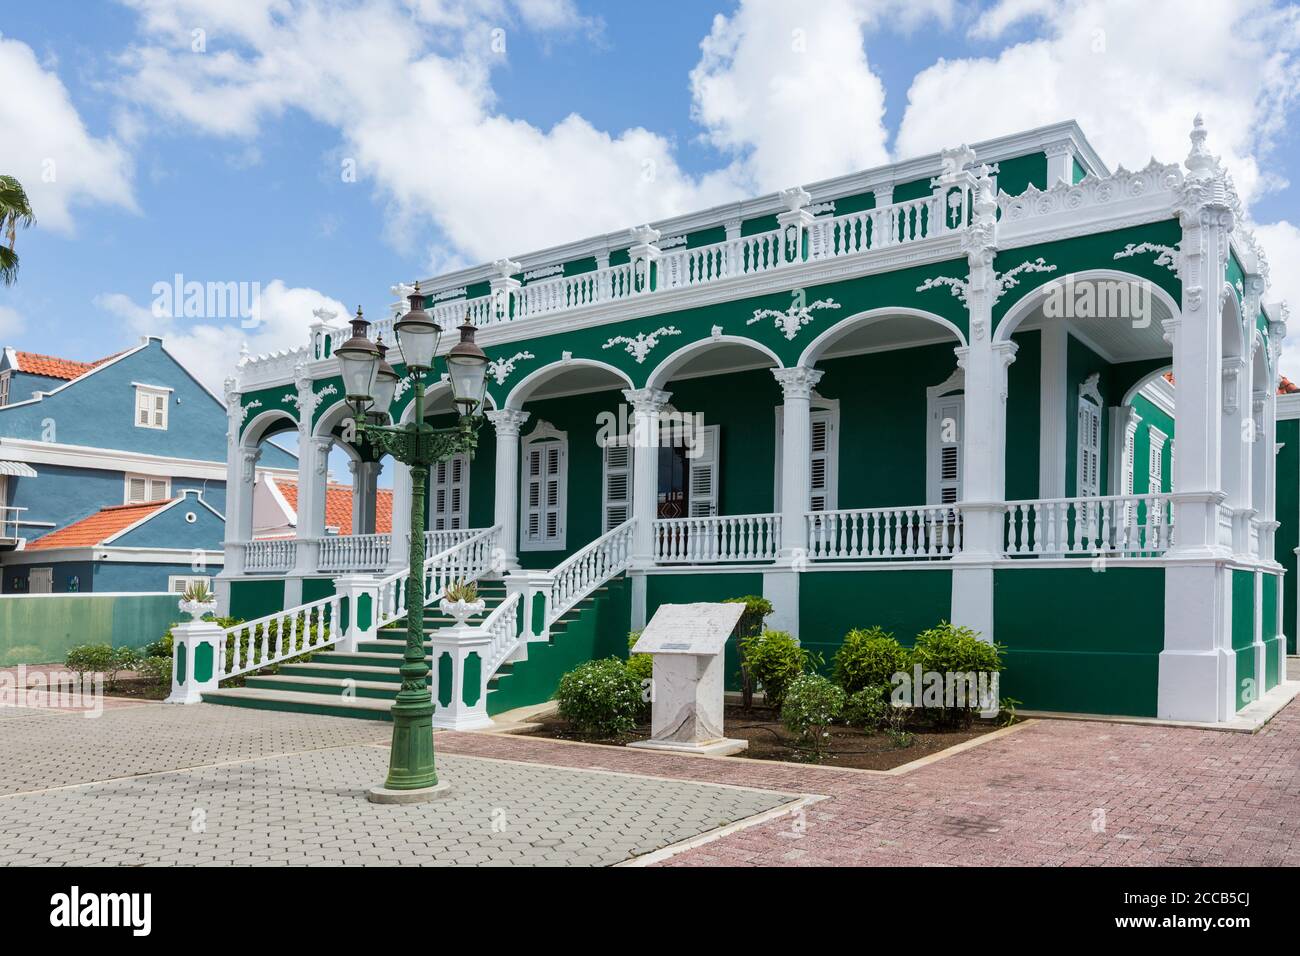 The National Archive of Curacao is housed at Scharlooweg 77 in a historic building constructed between 1916 and 1918 as a private residence.  When it Stock Photo